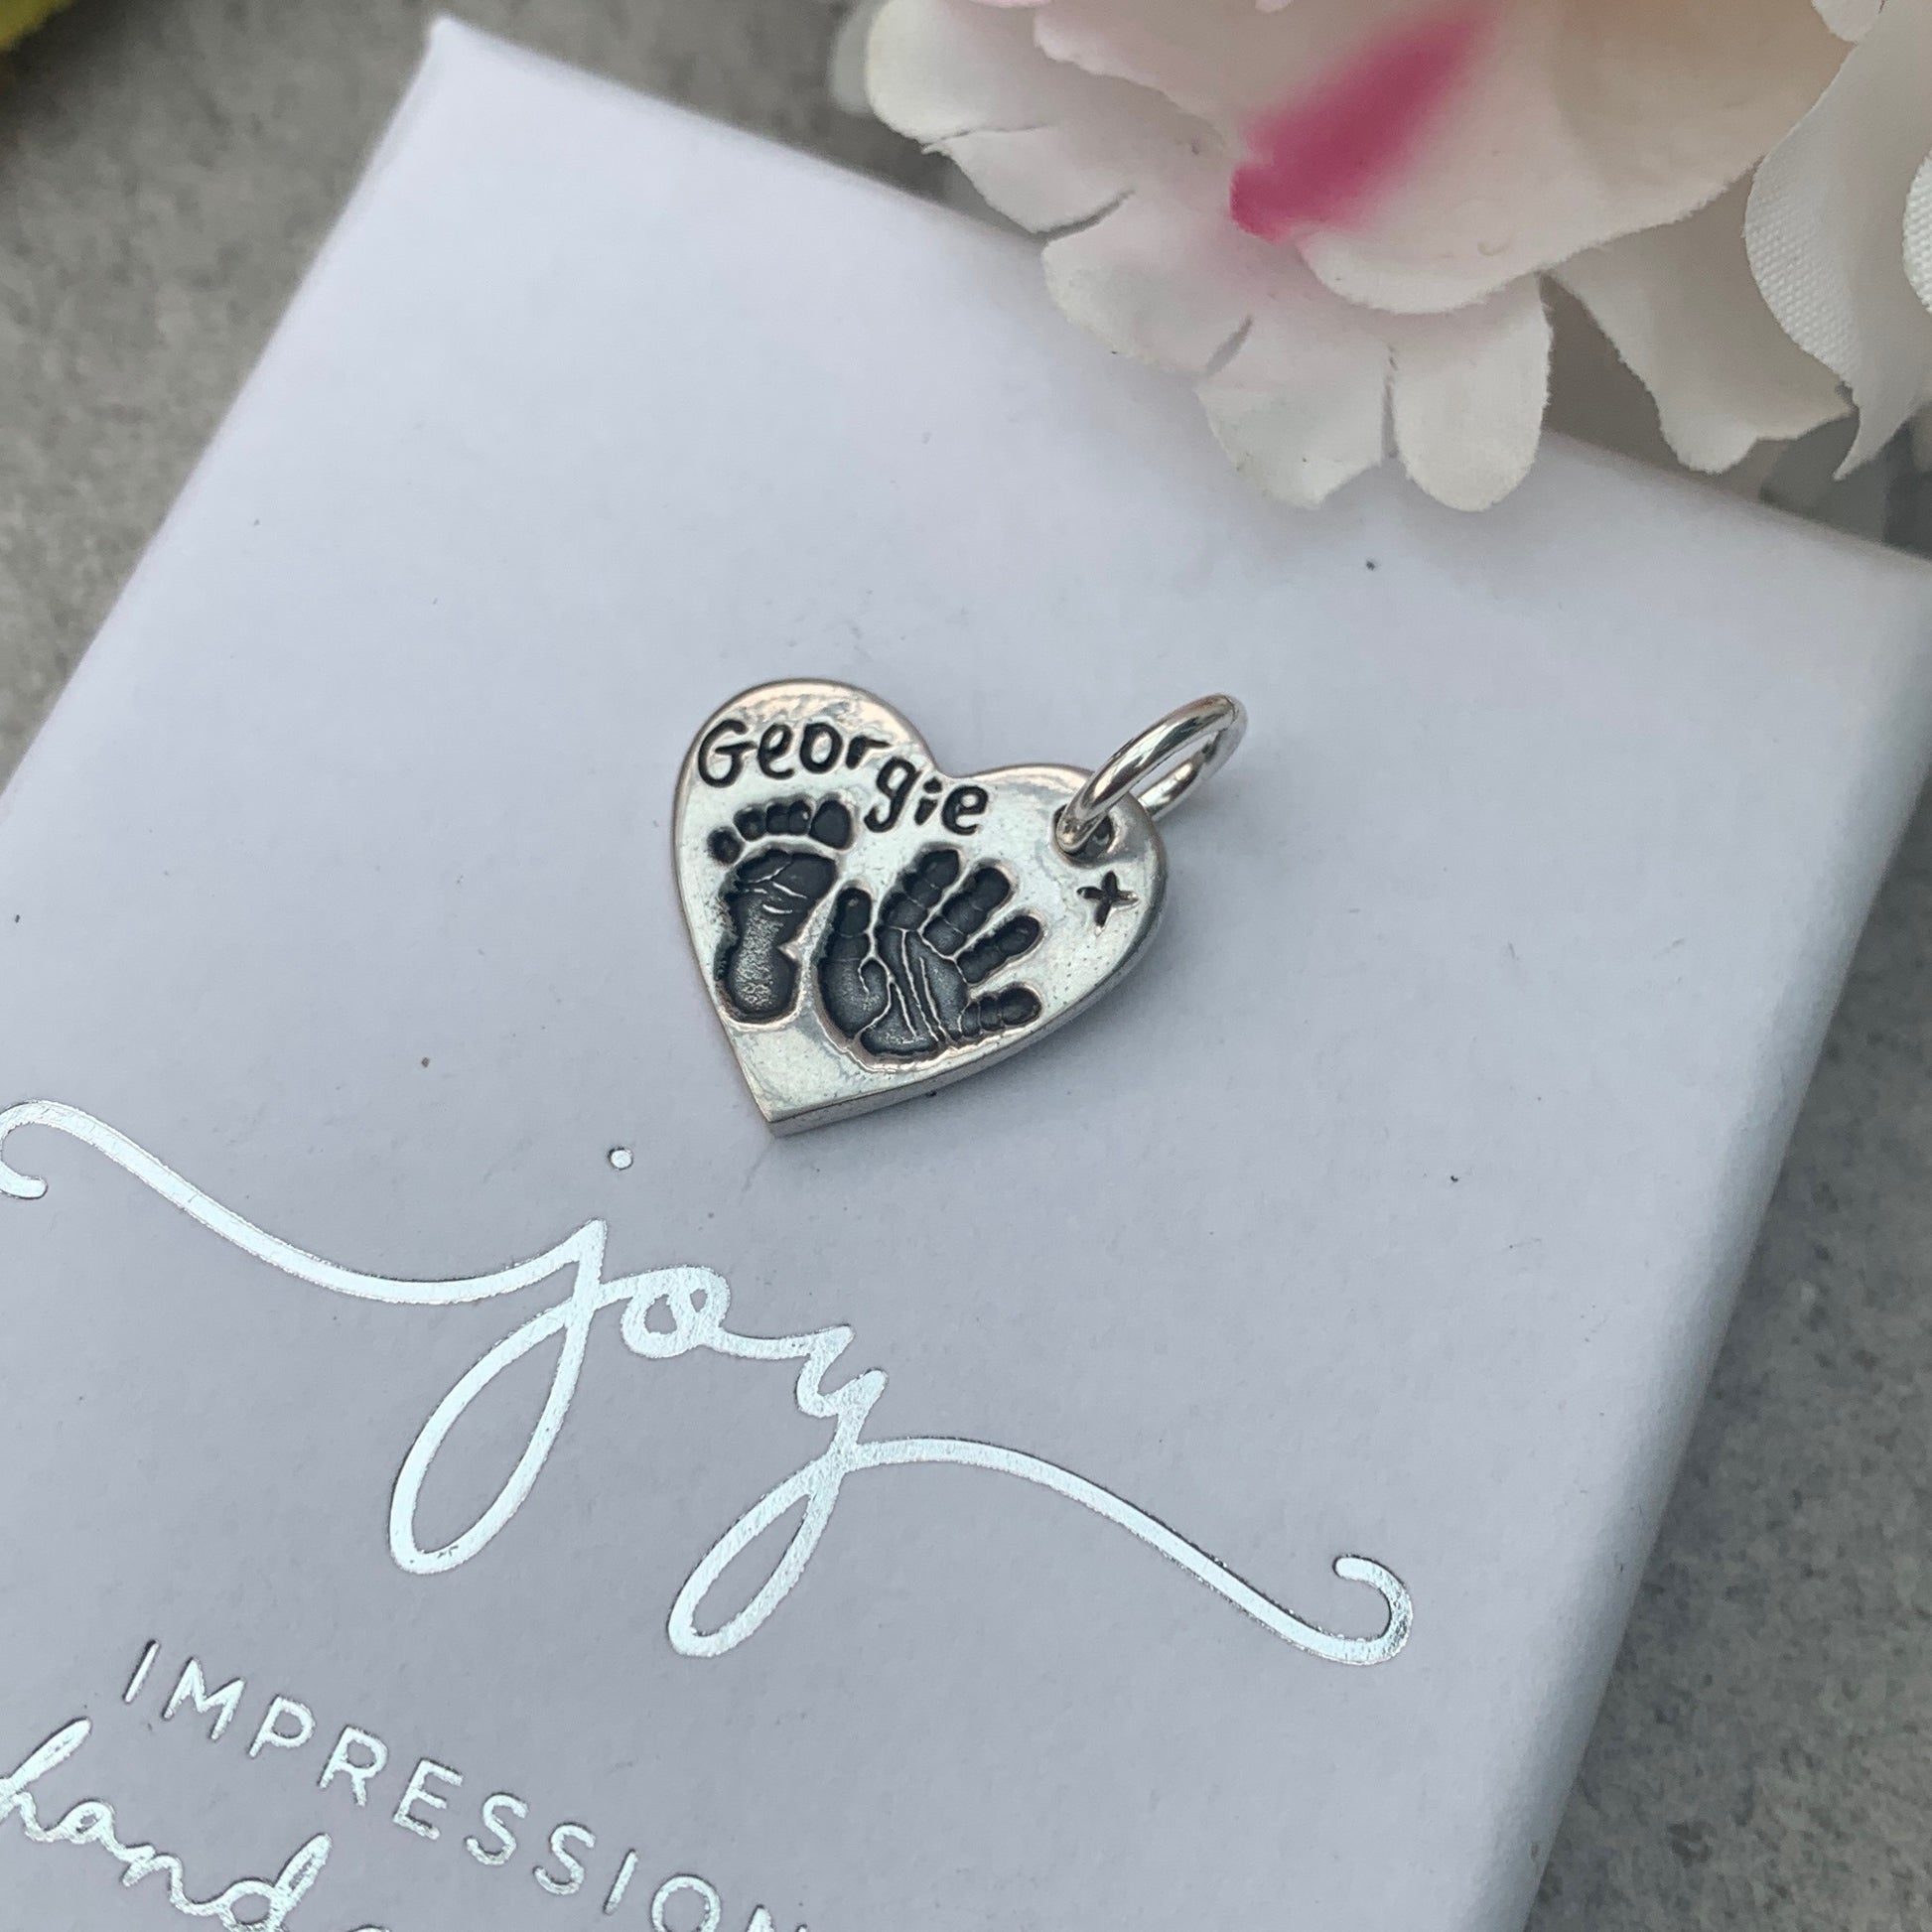 Hand and Footprint Sterling Silver Charm by Joy Impressions - close up